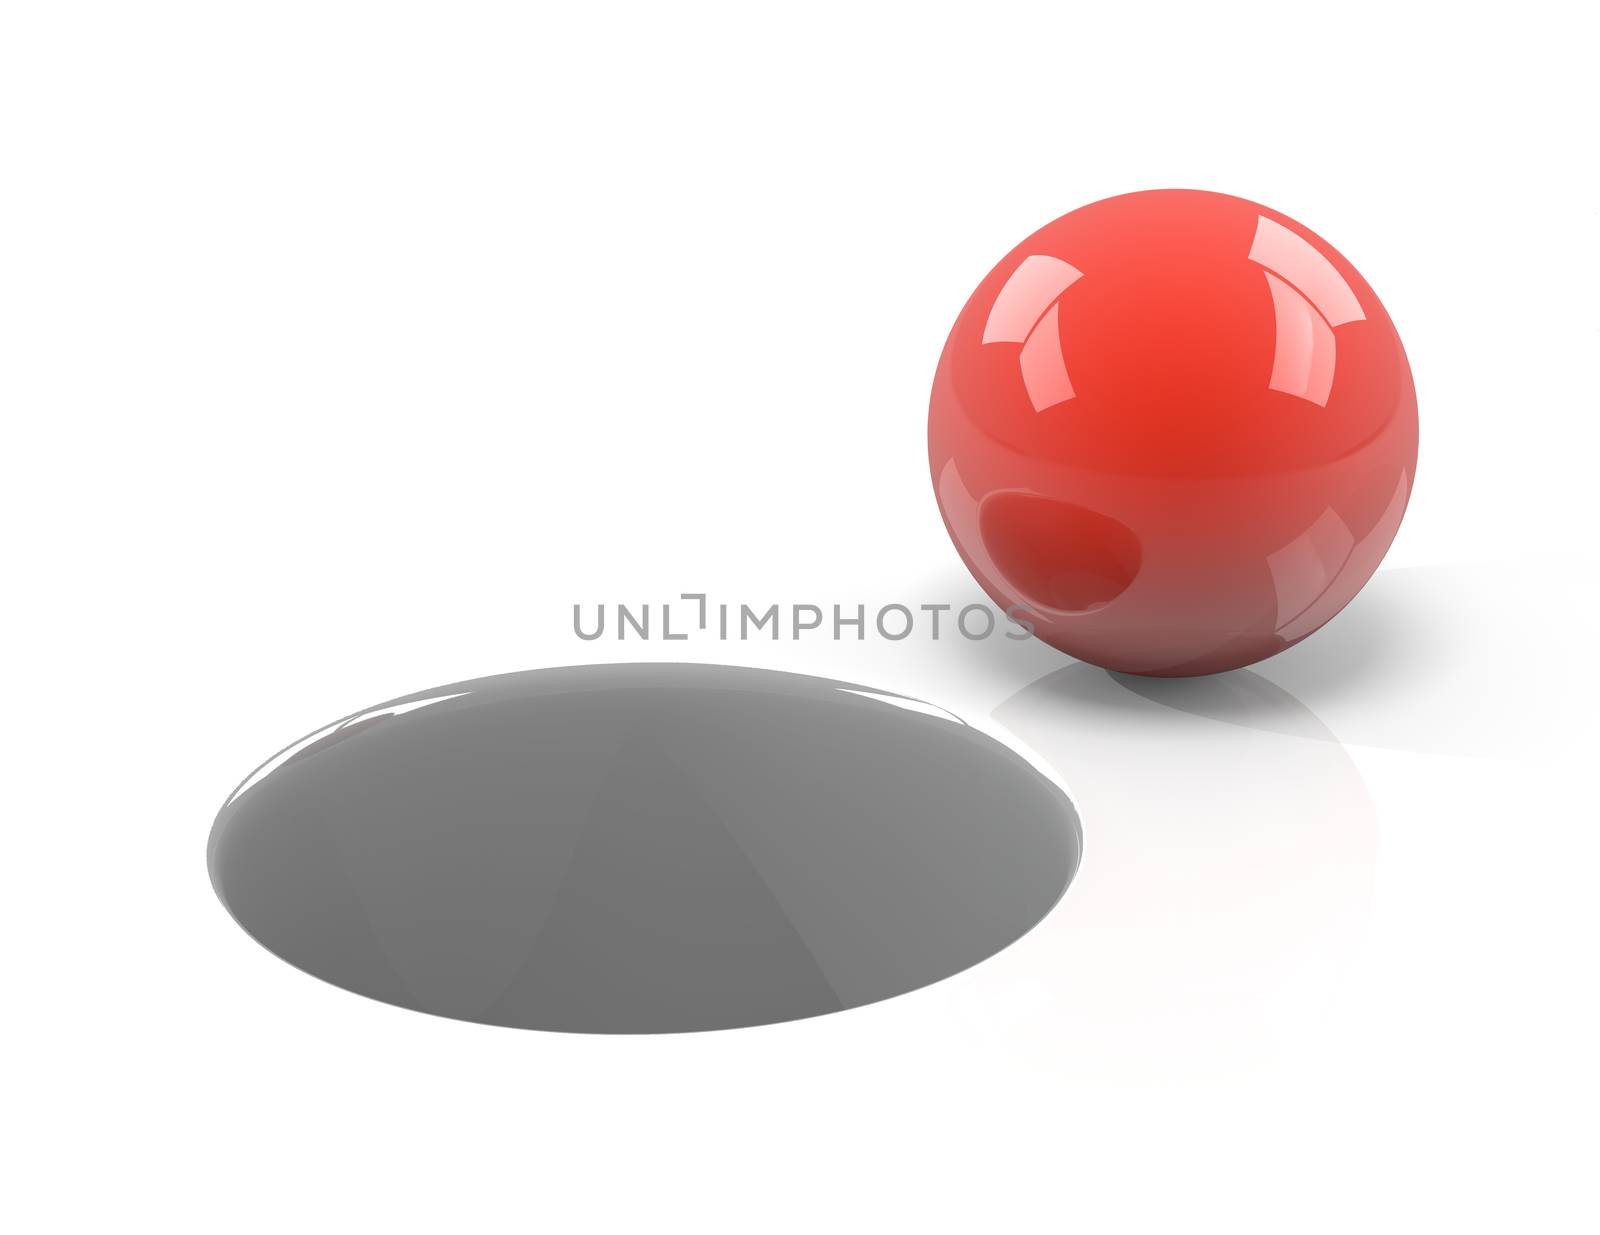 Single Red Ball and Hole on White Background